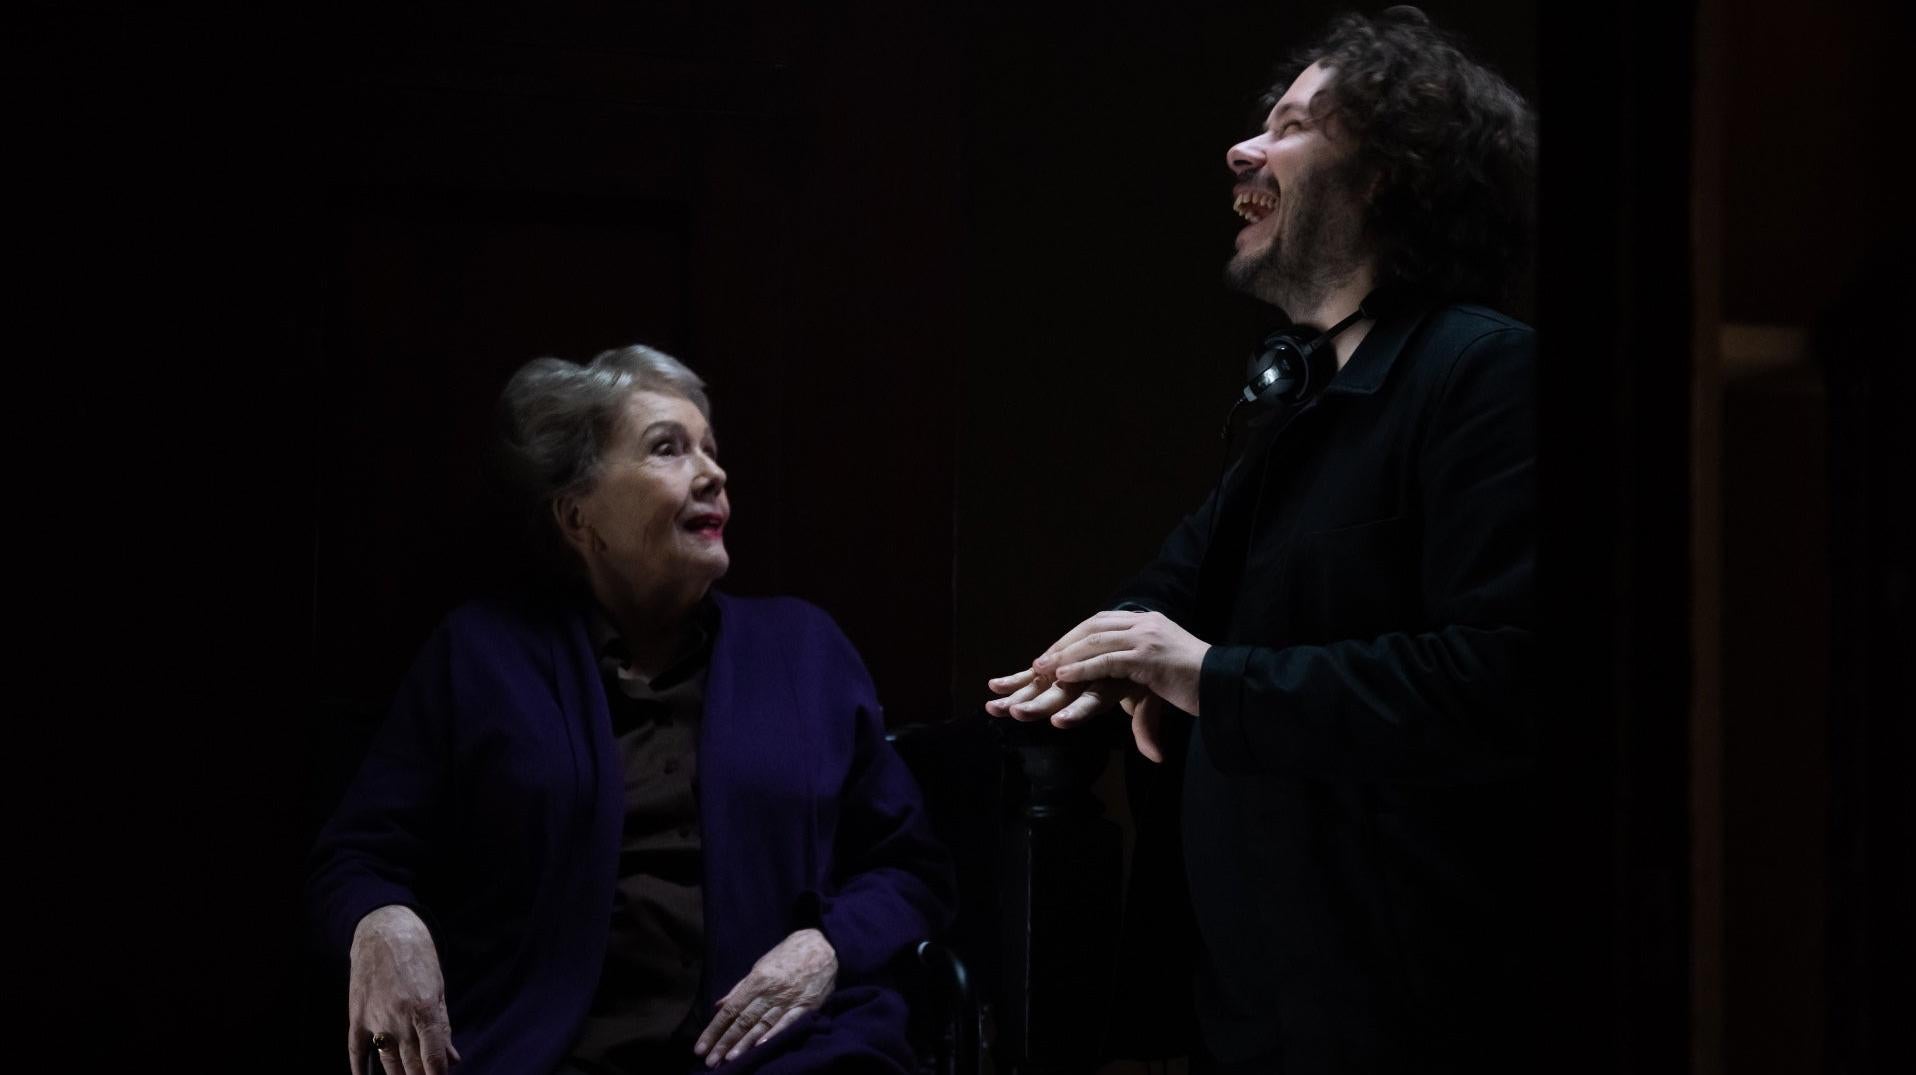 Edgar Wright with legendary, late Avenger, Diana Rigg. (Image: Focus Features)